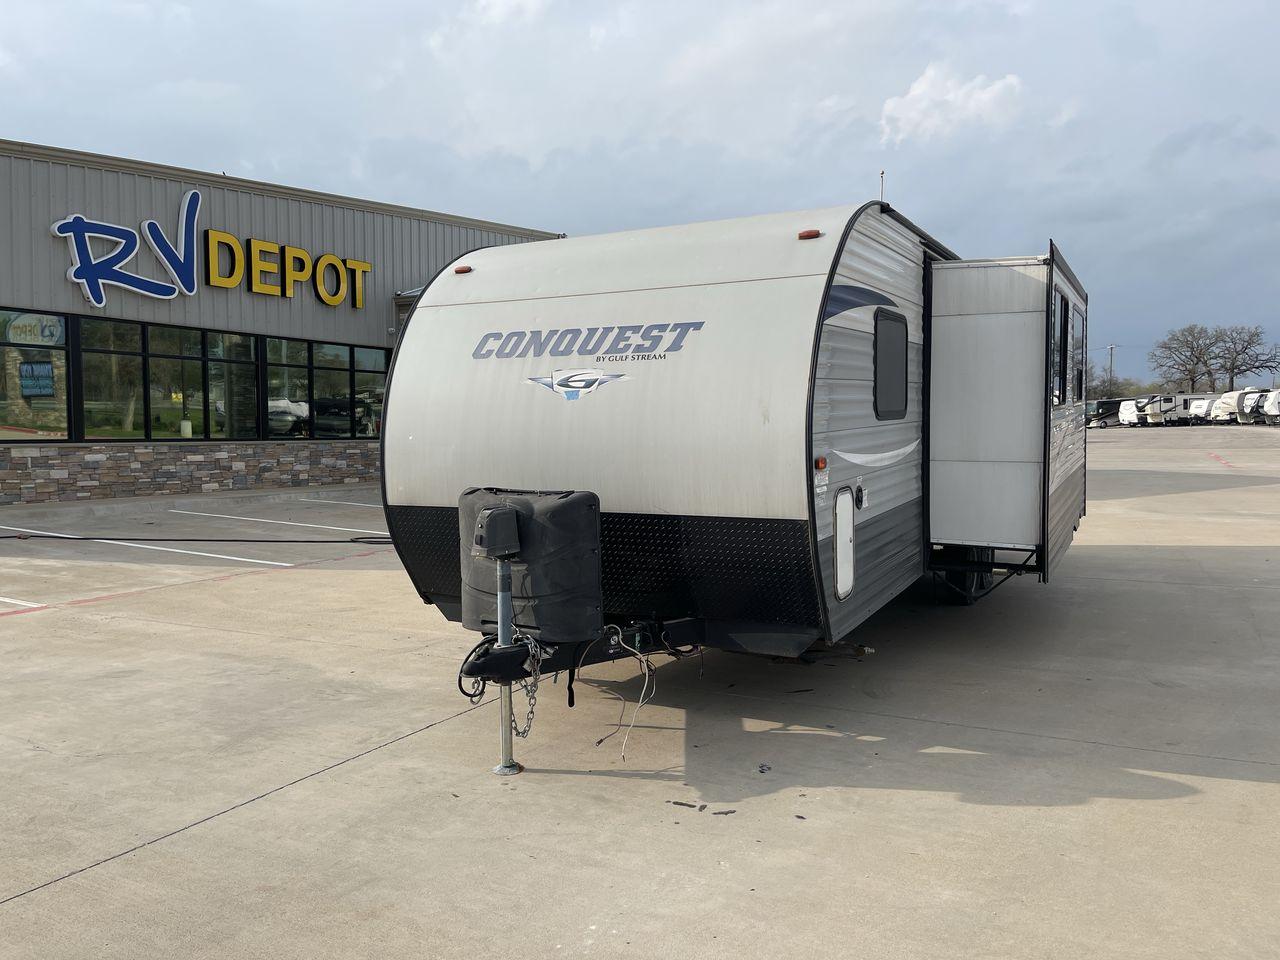 2019 WHITE GULF STREAM CONQUEST 268BH (1NL1G3026K1) , Length: 29.5 ft. | Dry Weight: 5,220 lbs. | Slides: 1 transmission, located at 4319 N Main St, Cleburne, TX, 76033, (817) 678-5133, 32.385960, -97.391212 - Lavish in a cozy trailer when you are out for a camping trip with the whole family in this 2019 Gulf Stream Conquest 268BH Travel Trailer. The measurements of this trailer are 29.6 ft in length, 8 ft in width, 11.1 ft in height, and 6.8 ft in interior height. It has a dry weight of 5,177 lbs with a - Photo #0